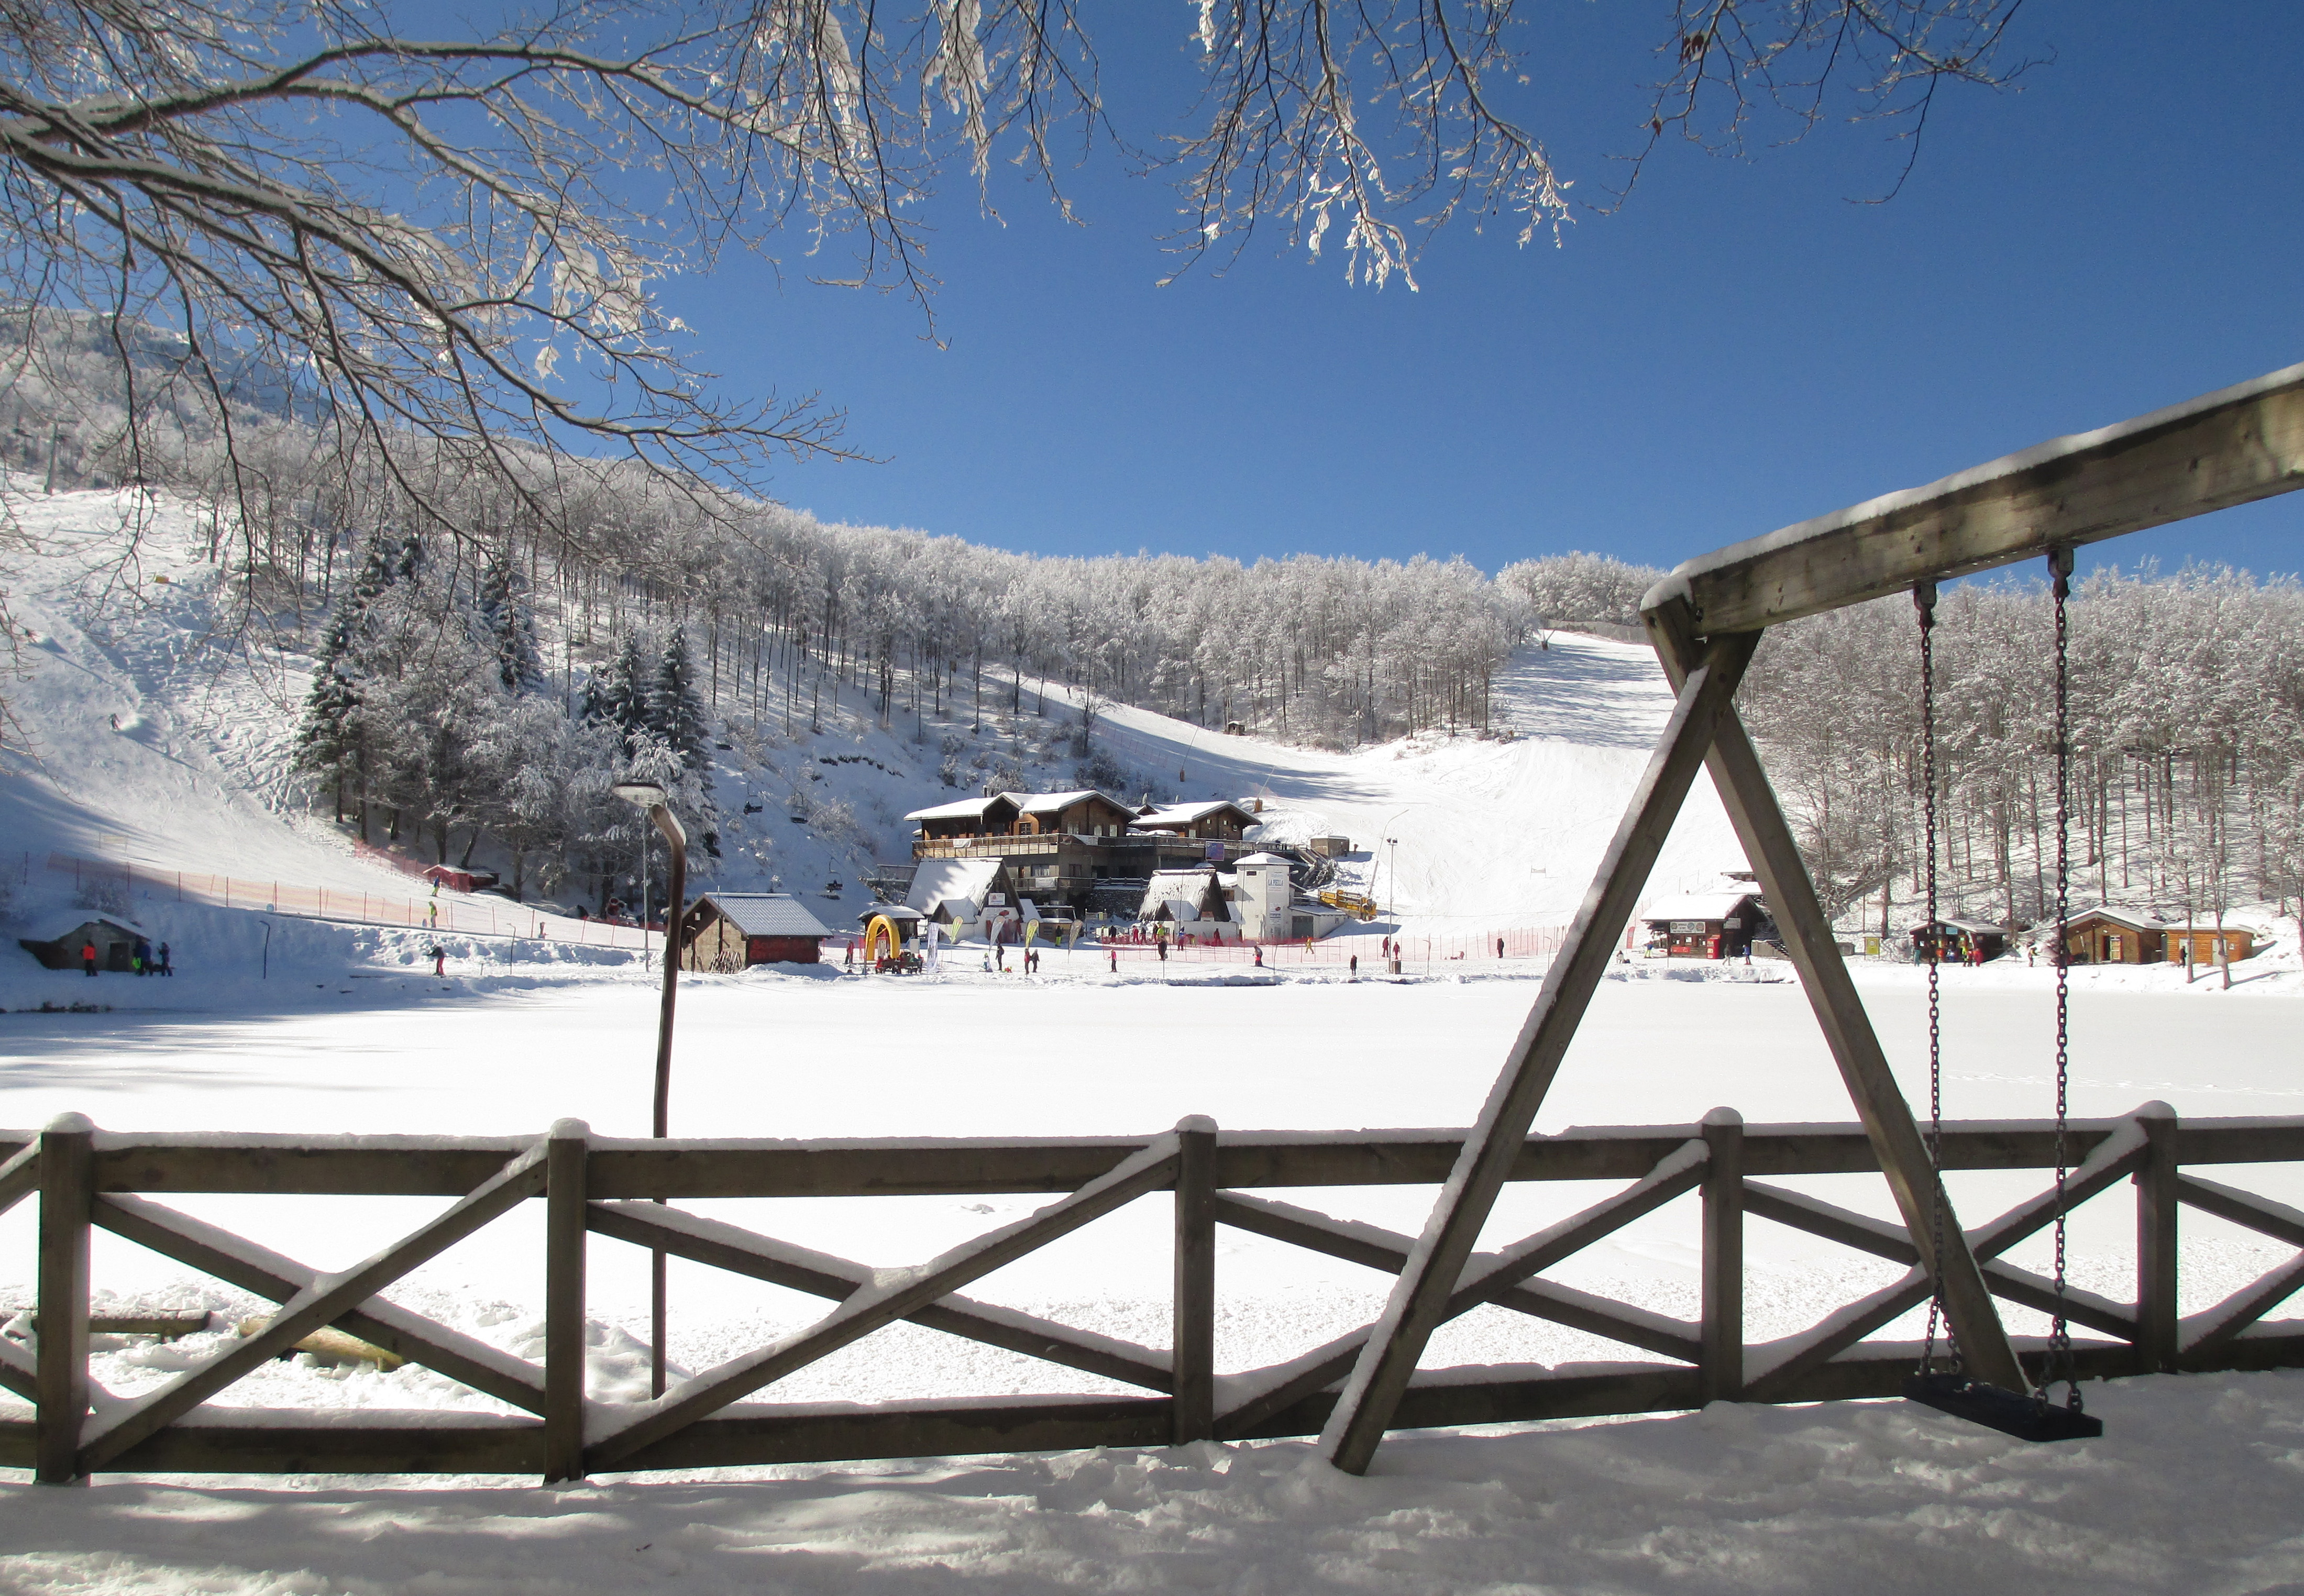 You are currently viewing CERRETO LAGHI: NEVE E BIMBI